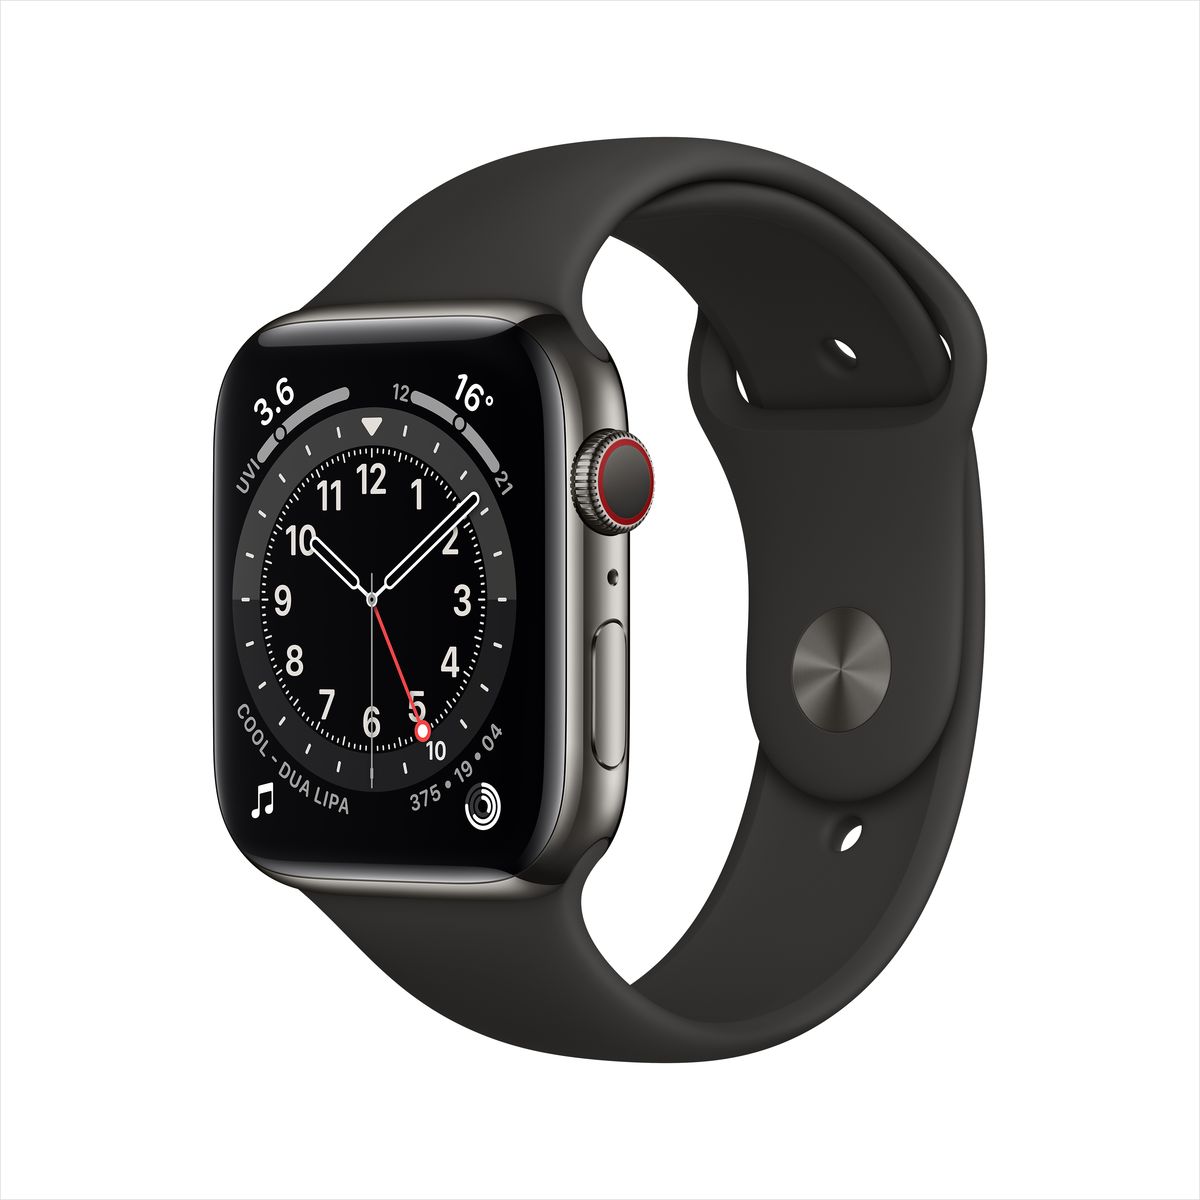 Apple Watch Series 6 GPS + Cellular 44mm Graphite Stainless Steel Case with Black Sport Band